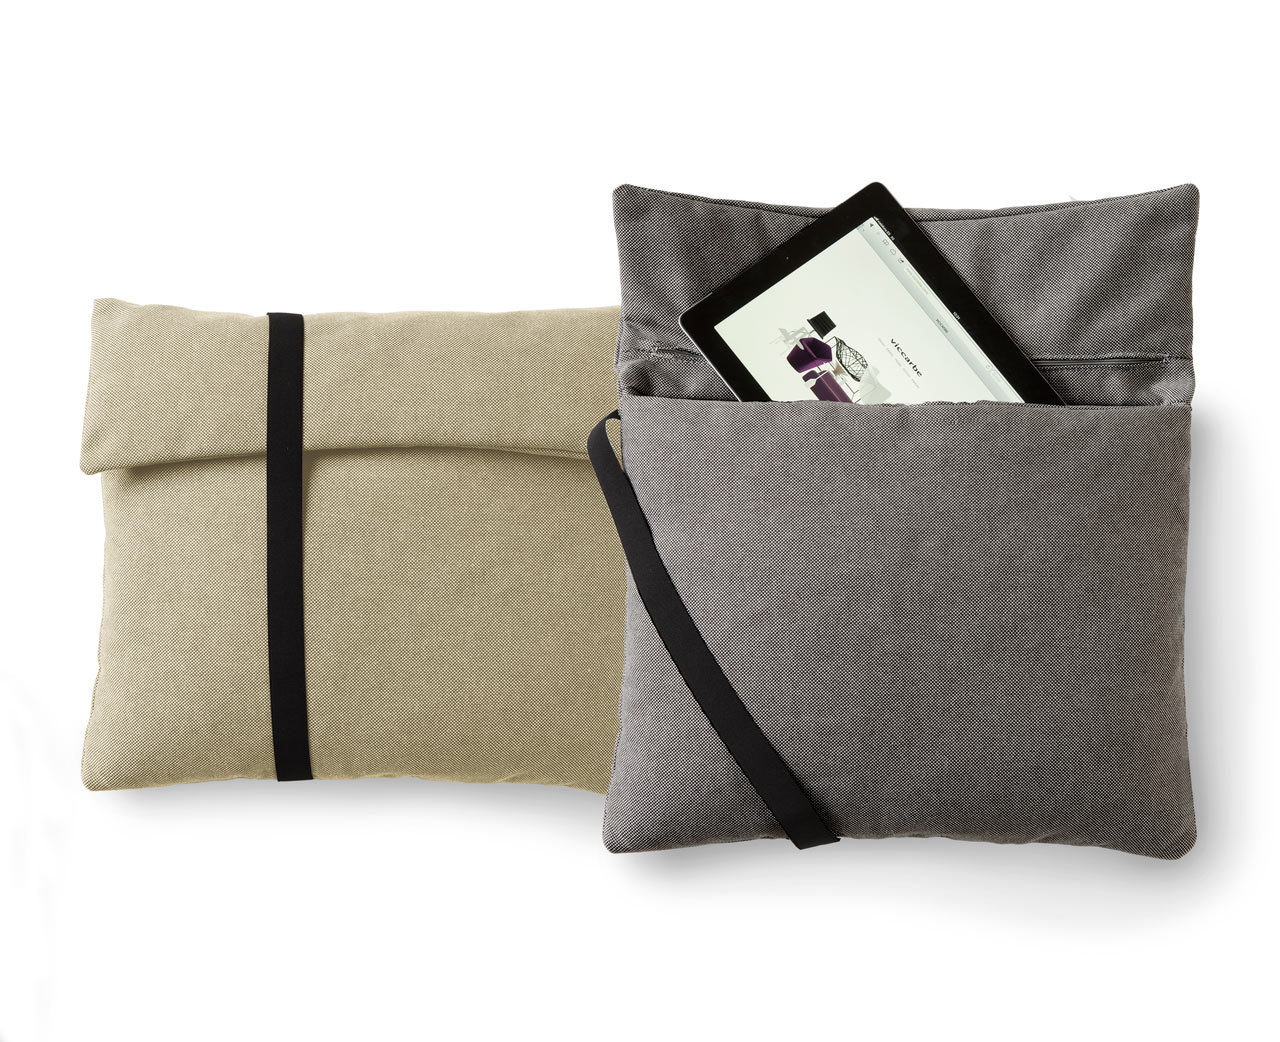 MYPILLOW by Odosdesign for Viccarbe